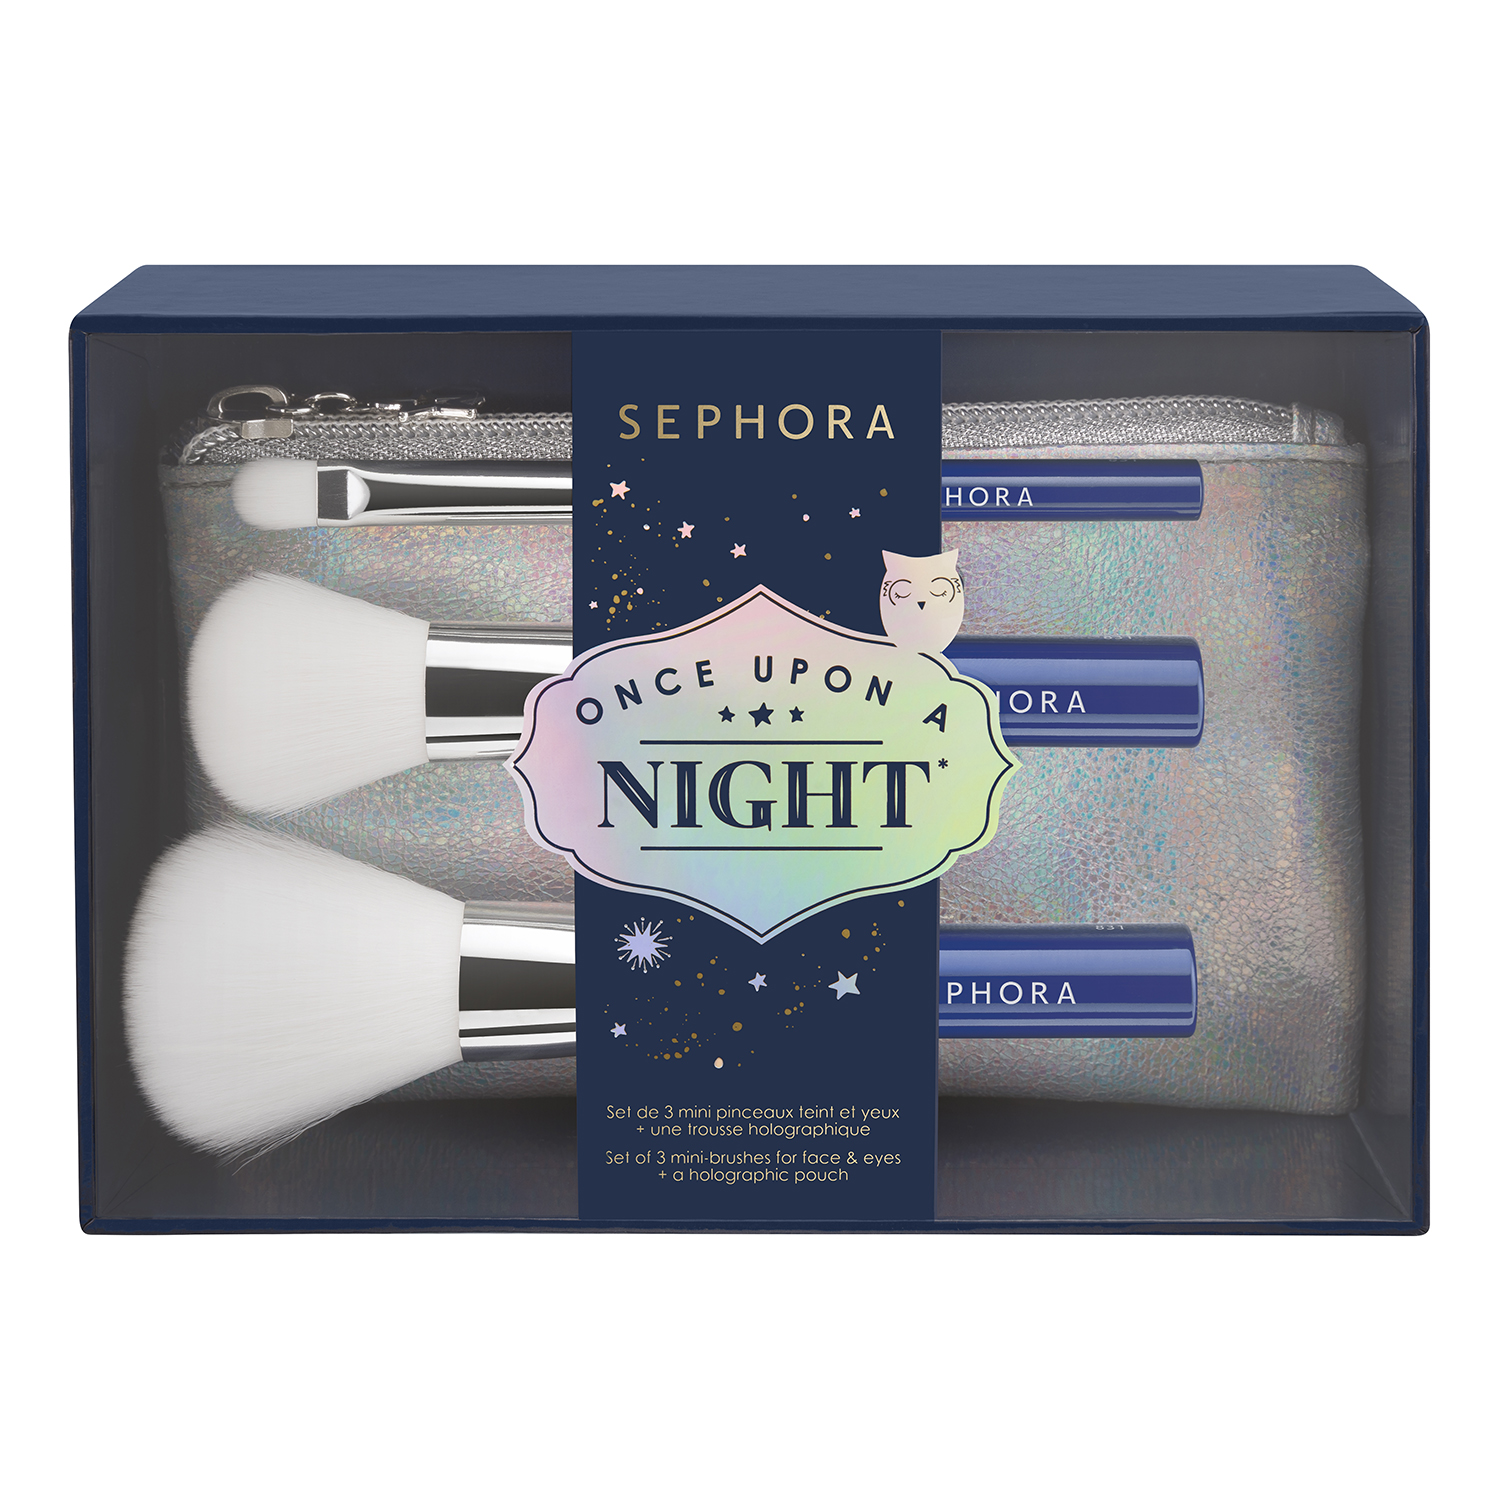 ONCE UPON A NIGHT SEPHORA PRIX 14,99€